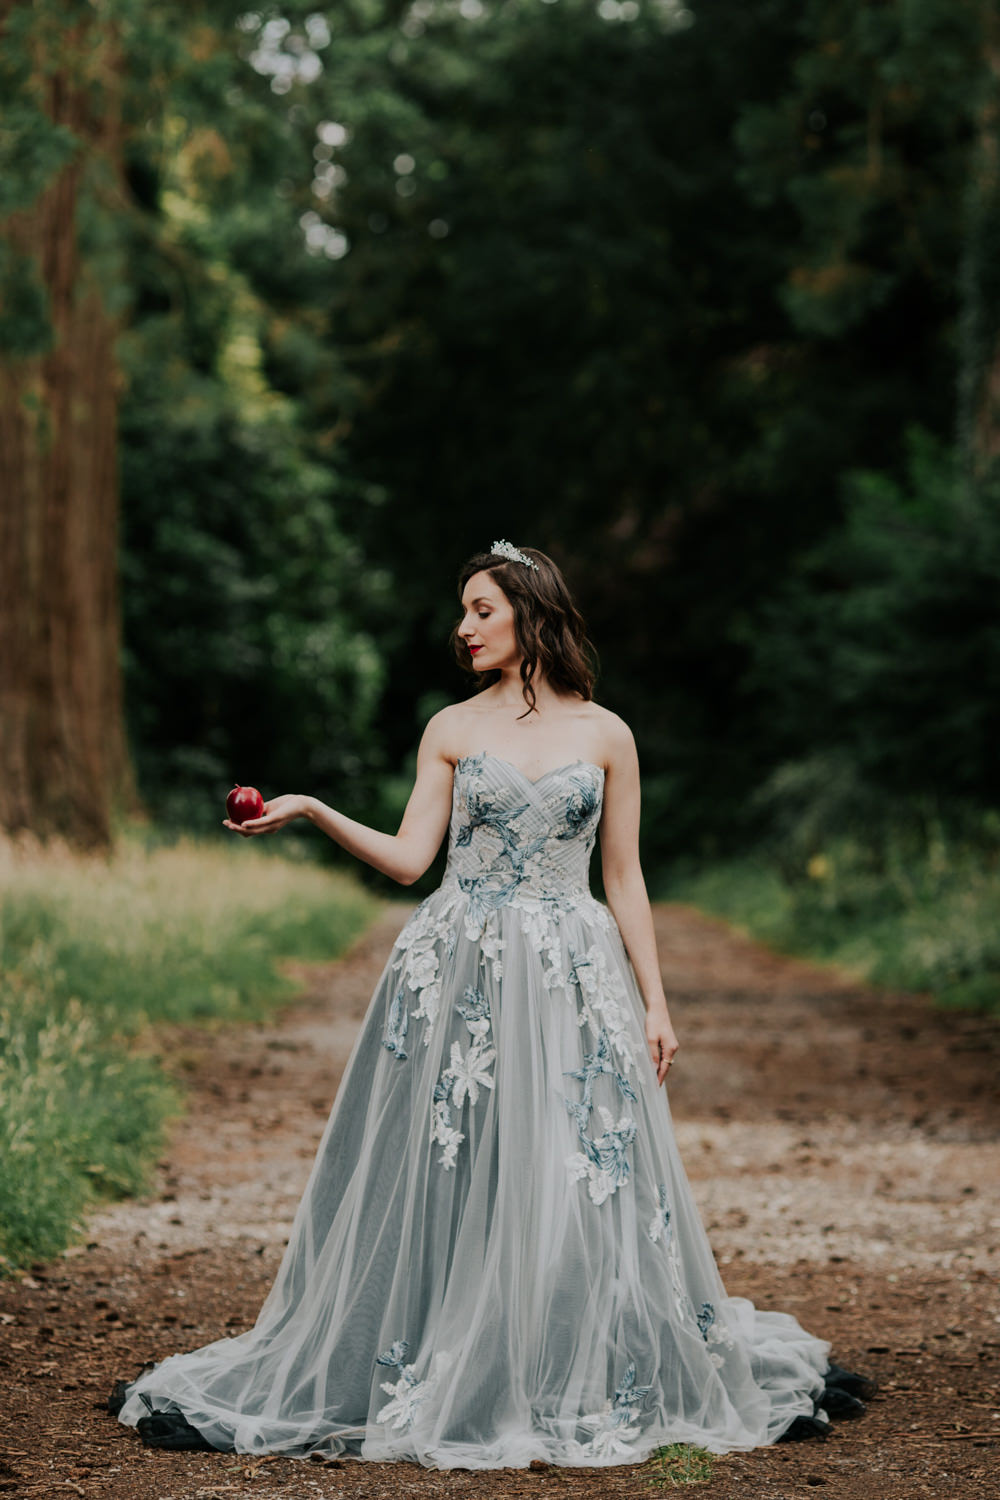 Dress Gown Bride Bridal Black Grey Tulle Strapless Snow White Wedding Inspiration Joasis Photography